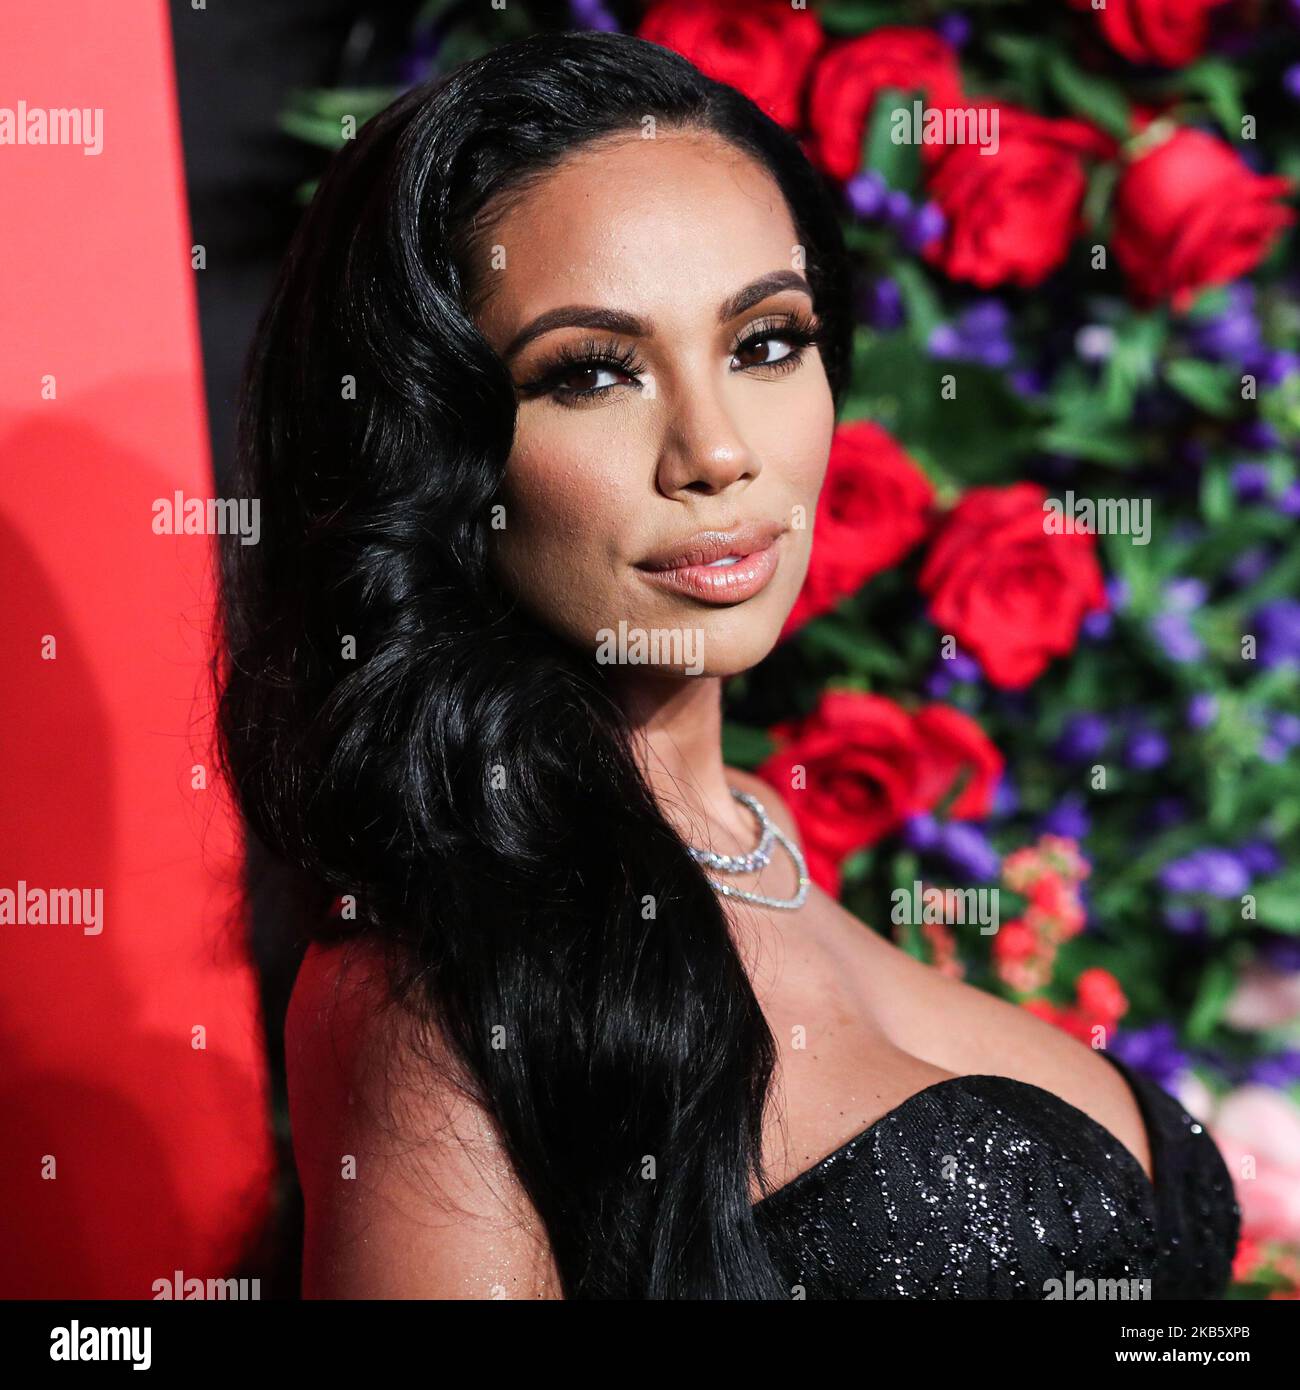 MANHATTAN, NEW YORK CITY, NEW YORK, USA - SEPTEMBER 12: Erica Mena arrives at Rihanna's 5th Annual Diamond Ball Benefitting The Clara Lionel Foundation held at Cipriani Wall Street on September 12, 2019 in Manhattan, New York City, New York, United States. (Photo by Xavier Collin/Image Press Agency/NurPhoto) Stock Photo